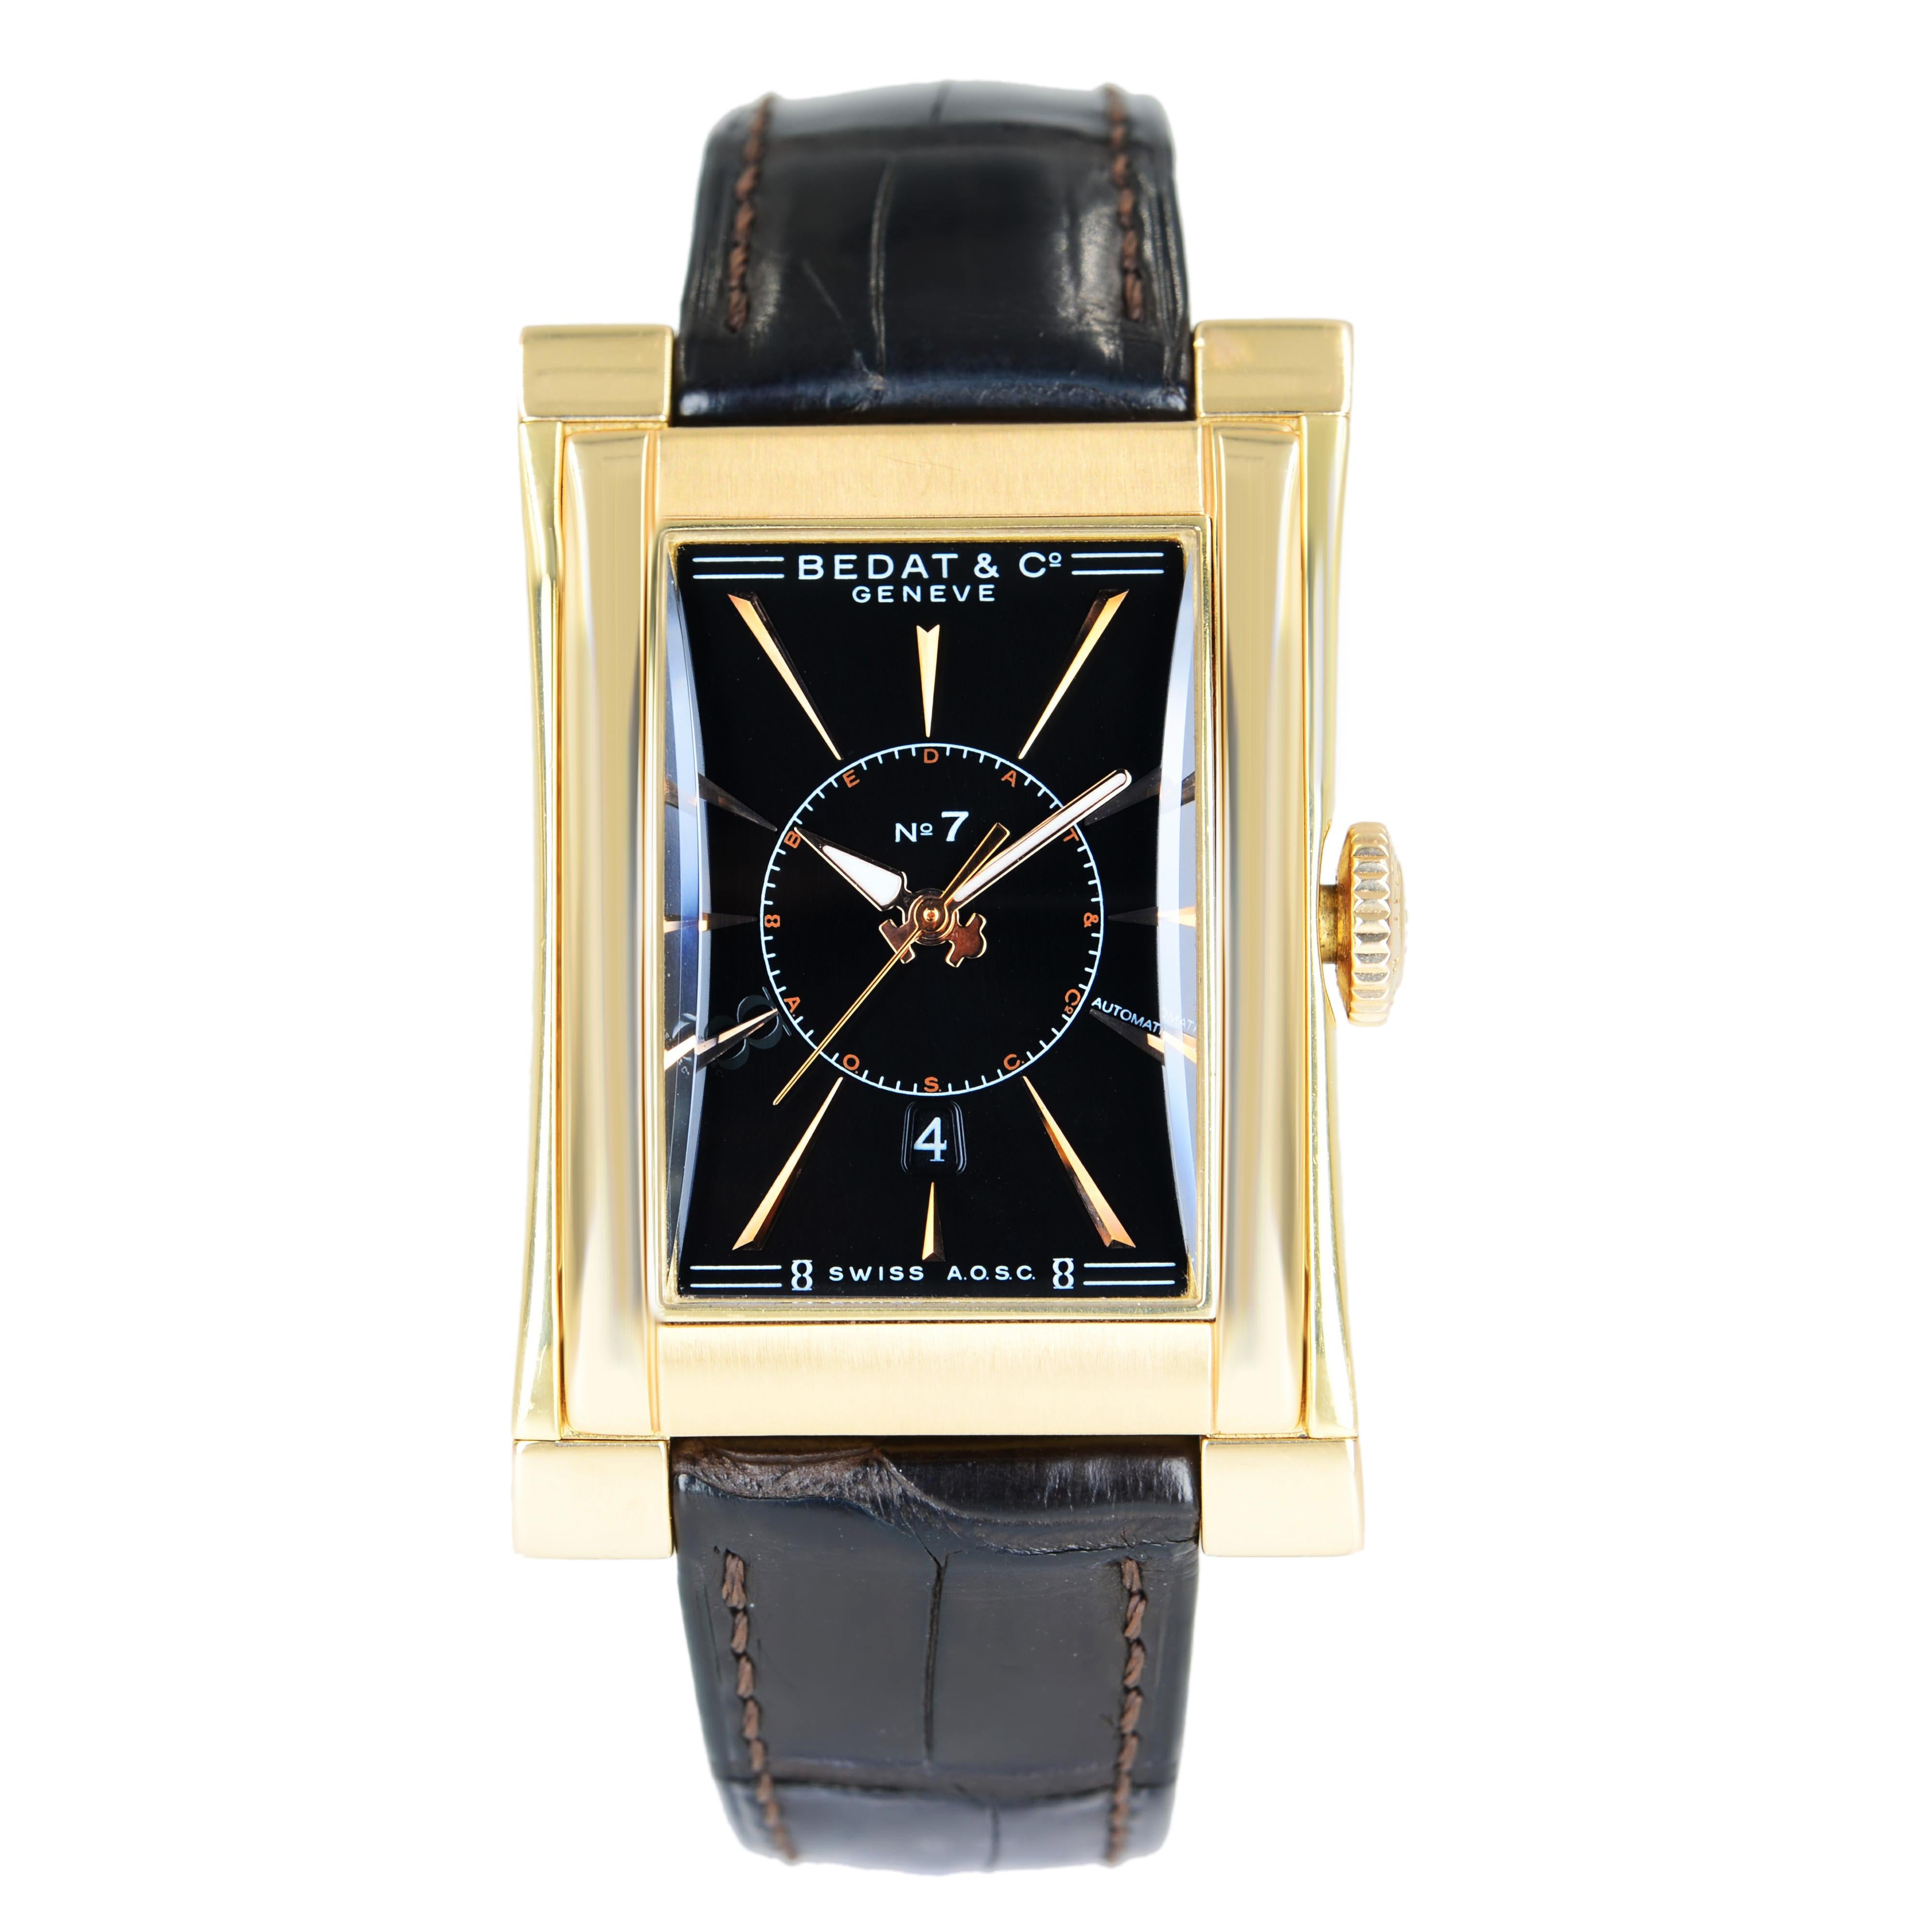 Bedat & Co No. 7 18k Gold Rectangle Black Dial Automatic Watch Ref 737